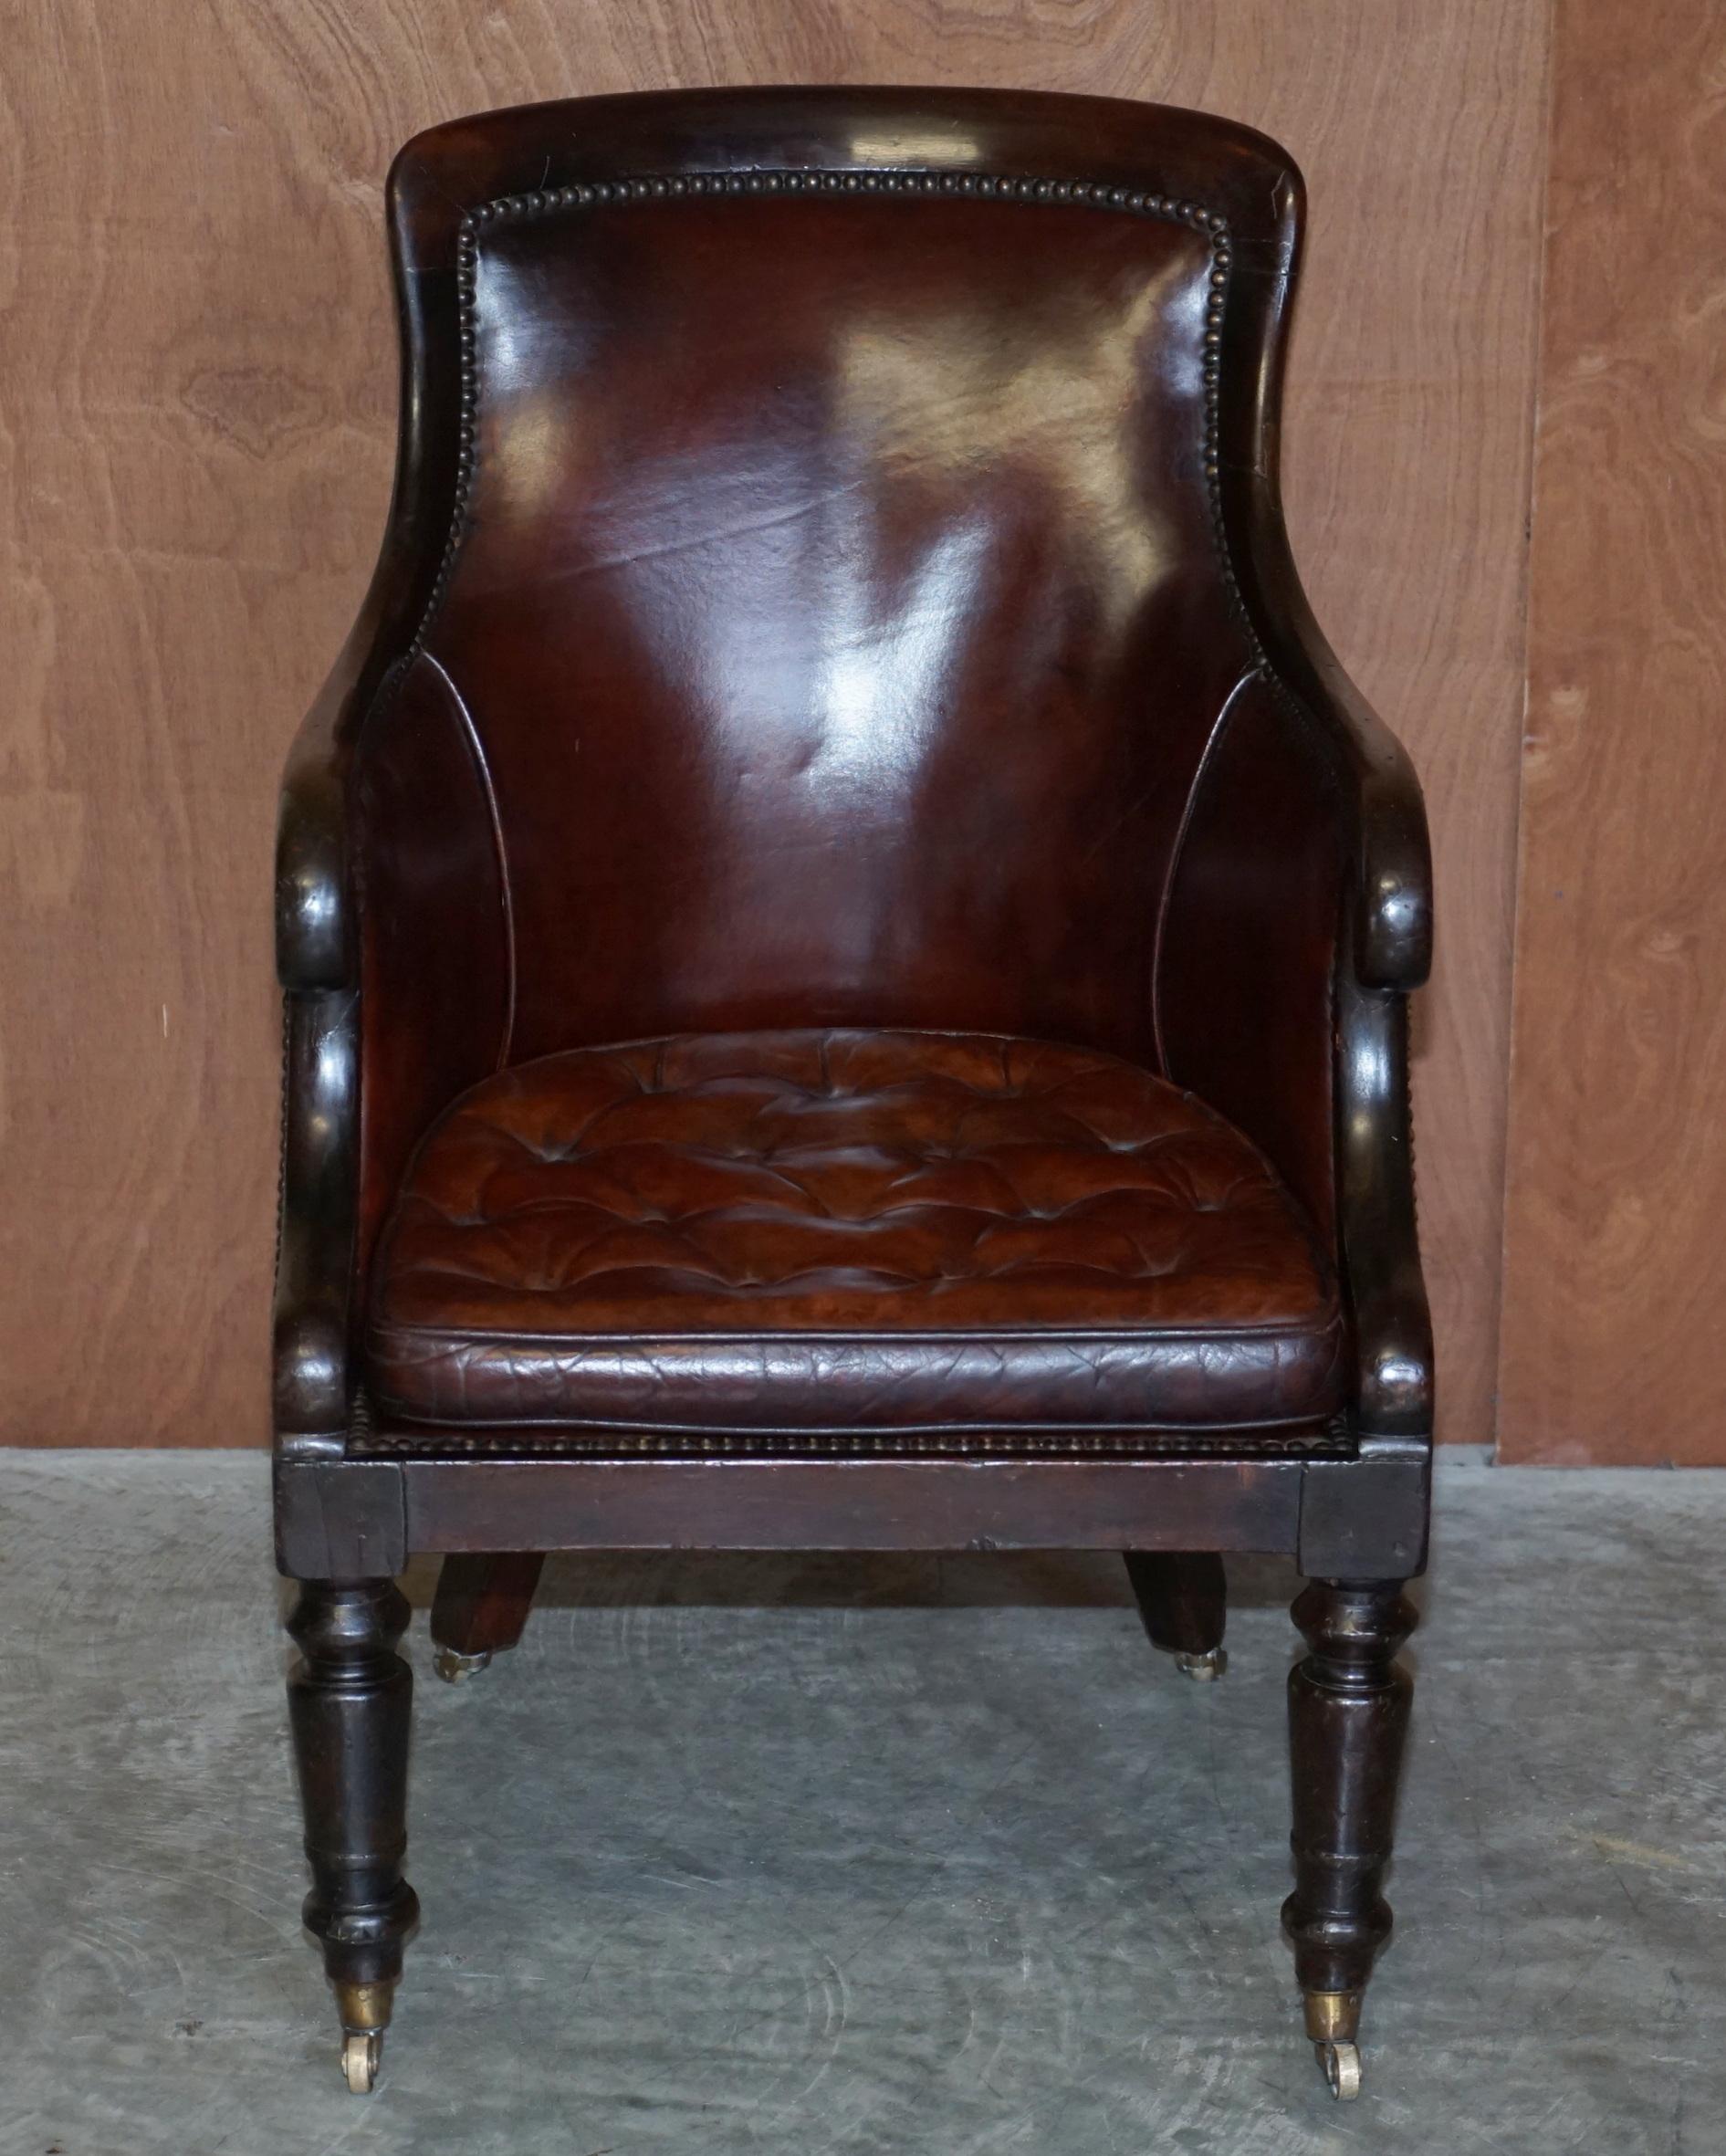 We are delighted to offer this stunning circa 1830 William IV mahogany and hand dyed brown leather library reading armchair with Thomas Chippendale floating button cushion

A good looking well made and decorative armchair, the frame is a luxury